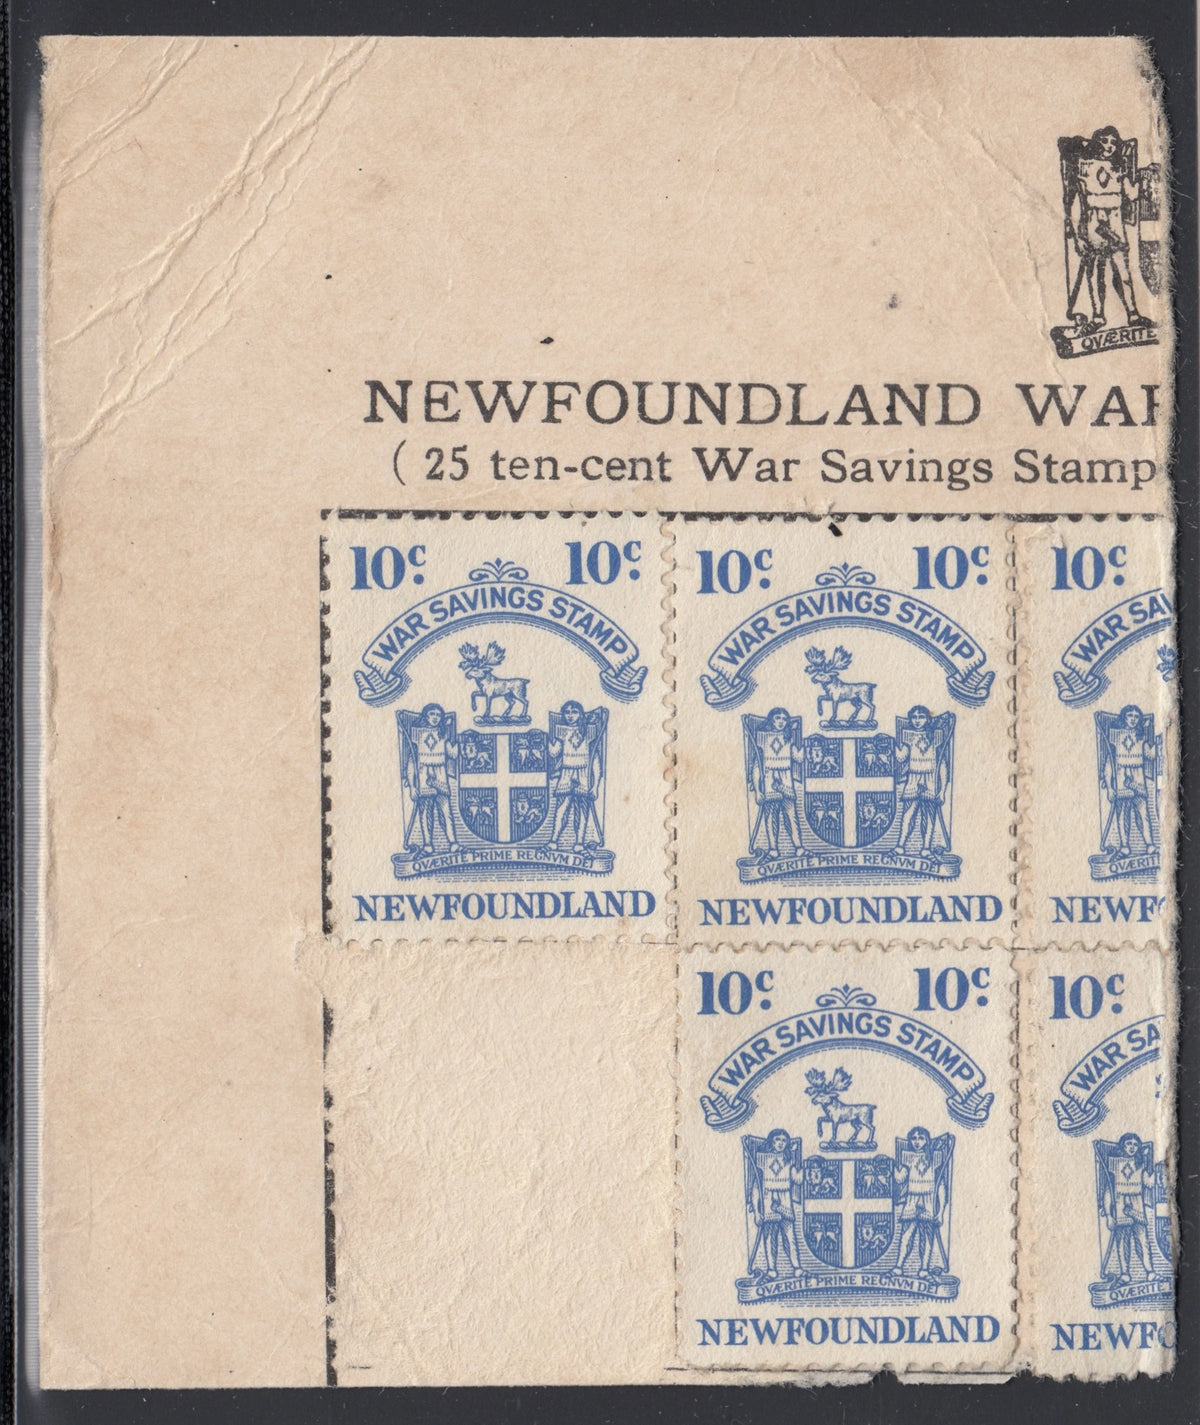 0064NF2108 - NFW1 - Uncancelled, On Savings Card Piece